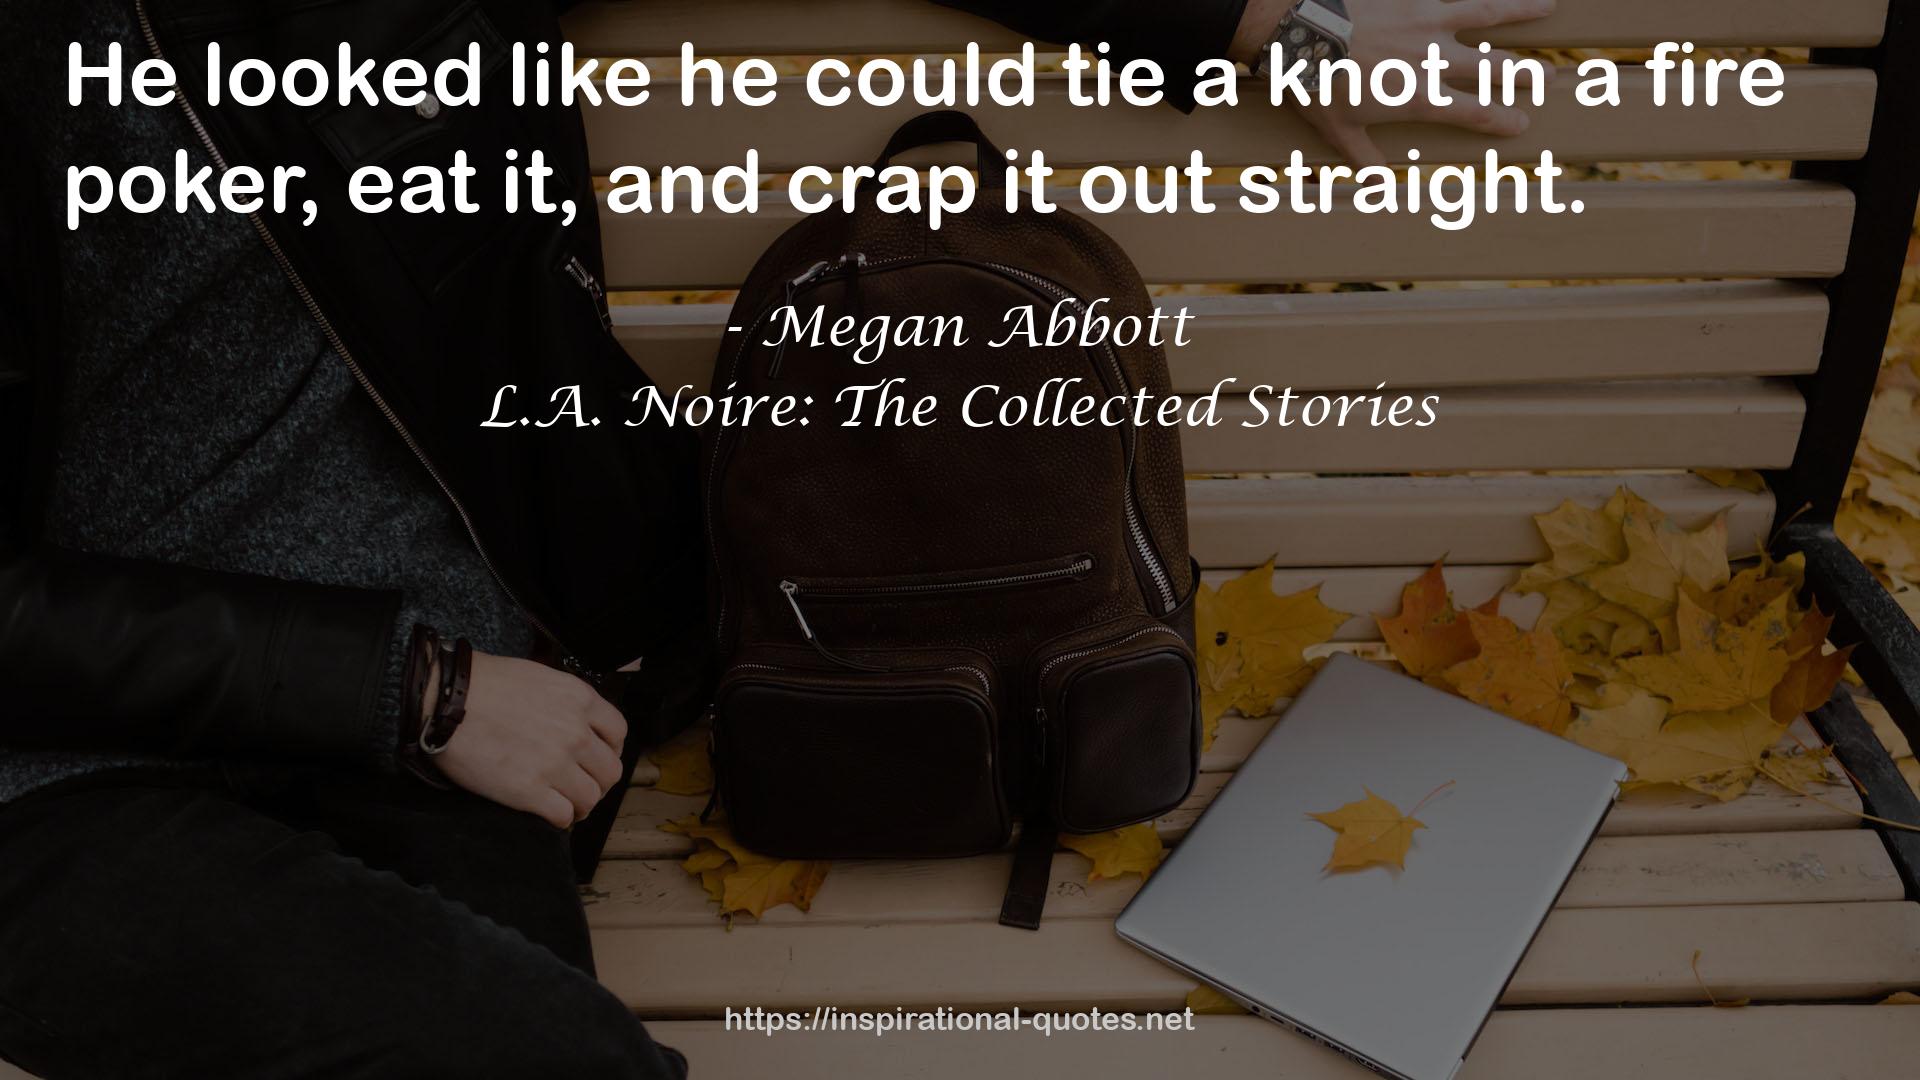 L.A. Noire: The Collected Stories QUOTES